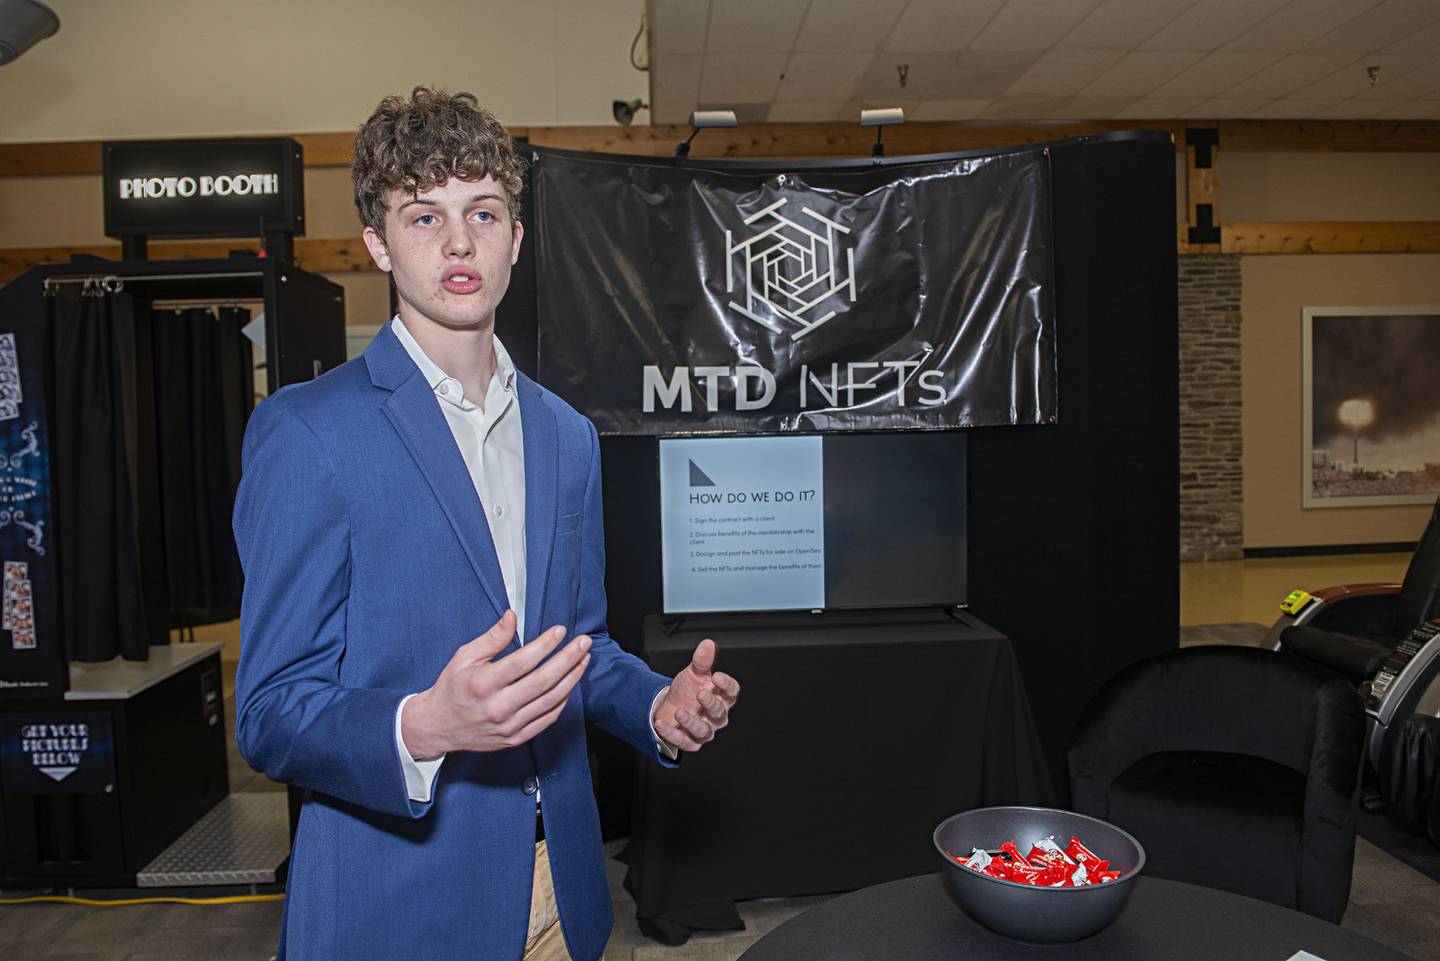 Newman High School junior and CEO class member and founder of MDT NFT’s Tate Downs, pitches his sell Thursday, April 28, 2022. Downs’ goal is to create an exclusive membership club for influencers and businesses. The technology makes membership trackable and traceable.